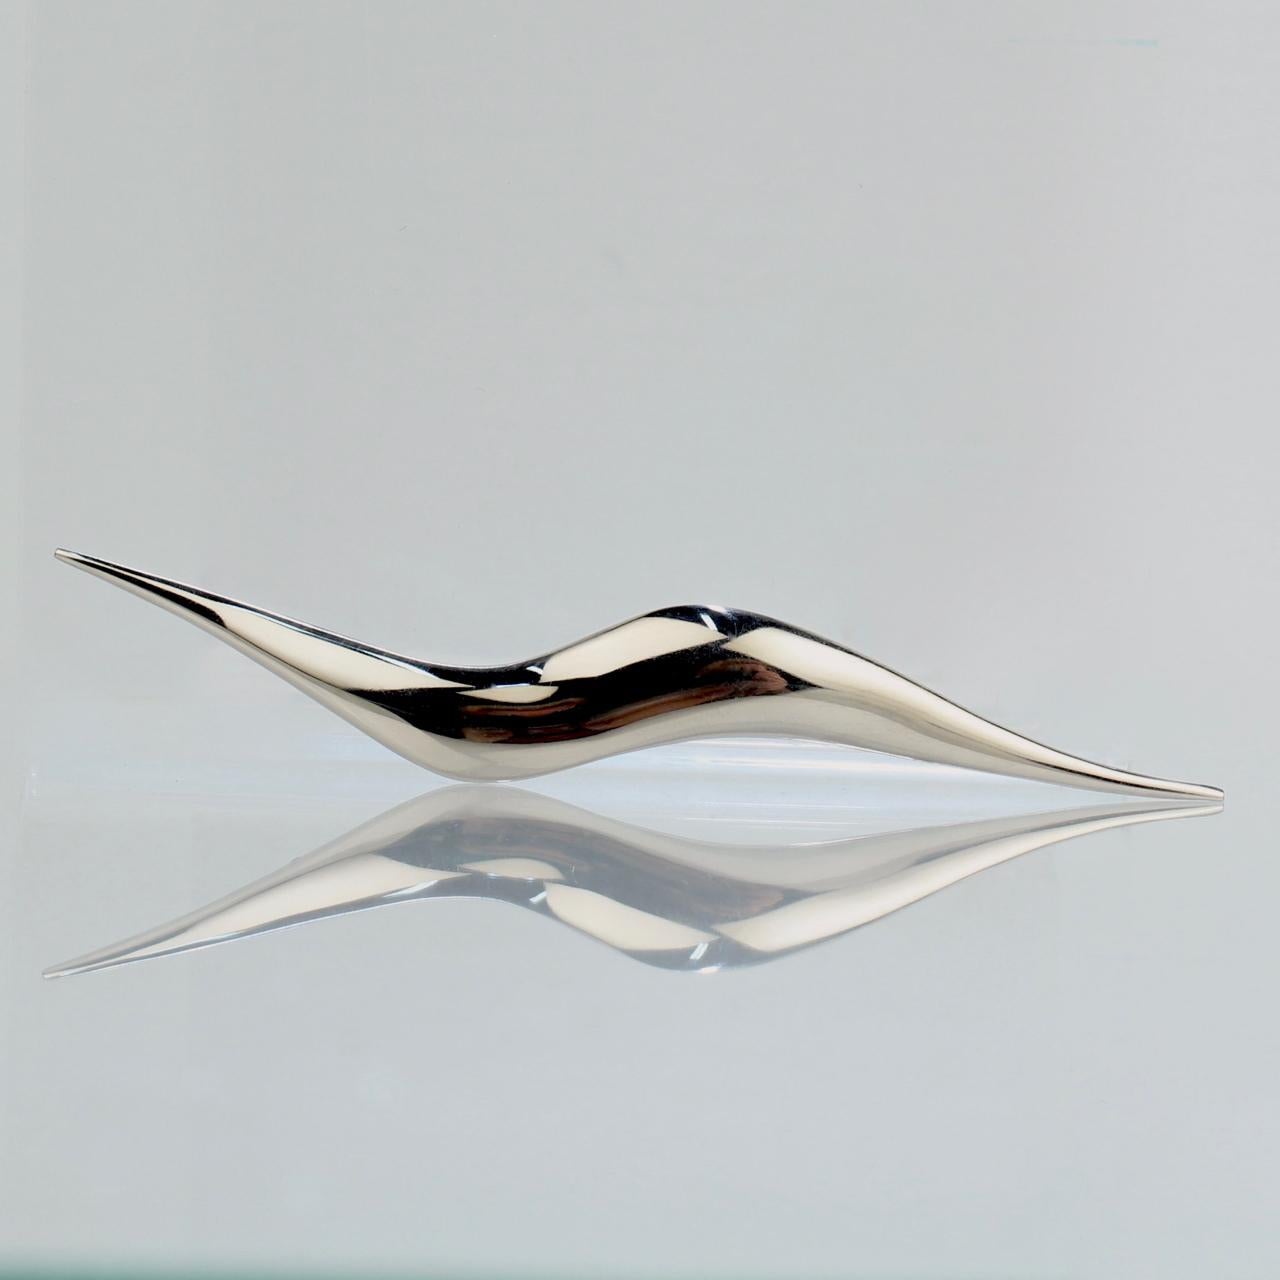 A stainless steel brooch.

By the American Modernist Jose De Rivera.

In a stylized 